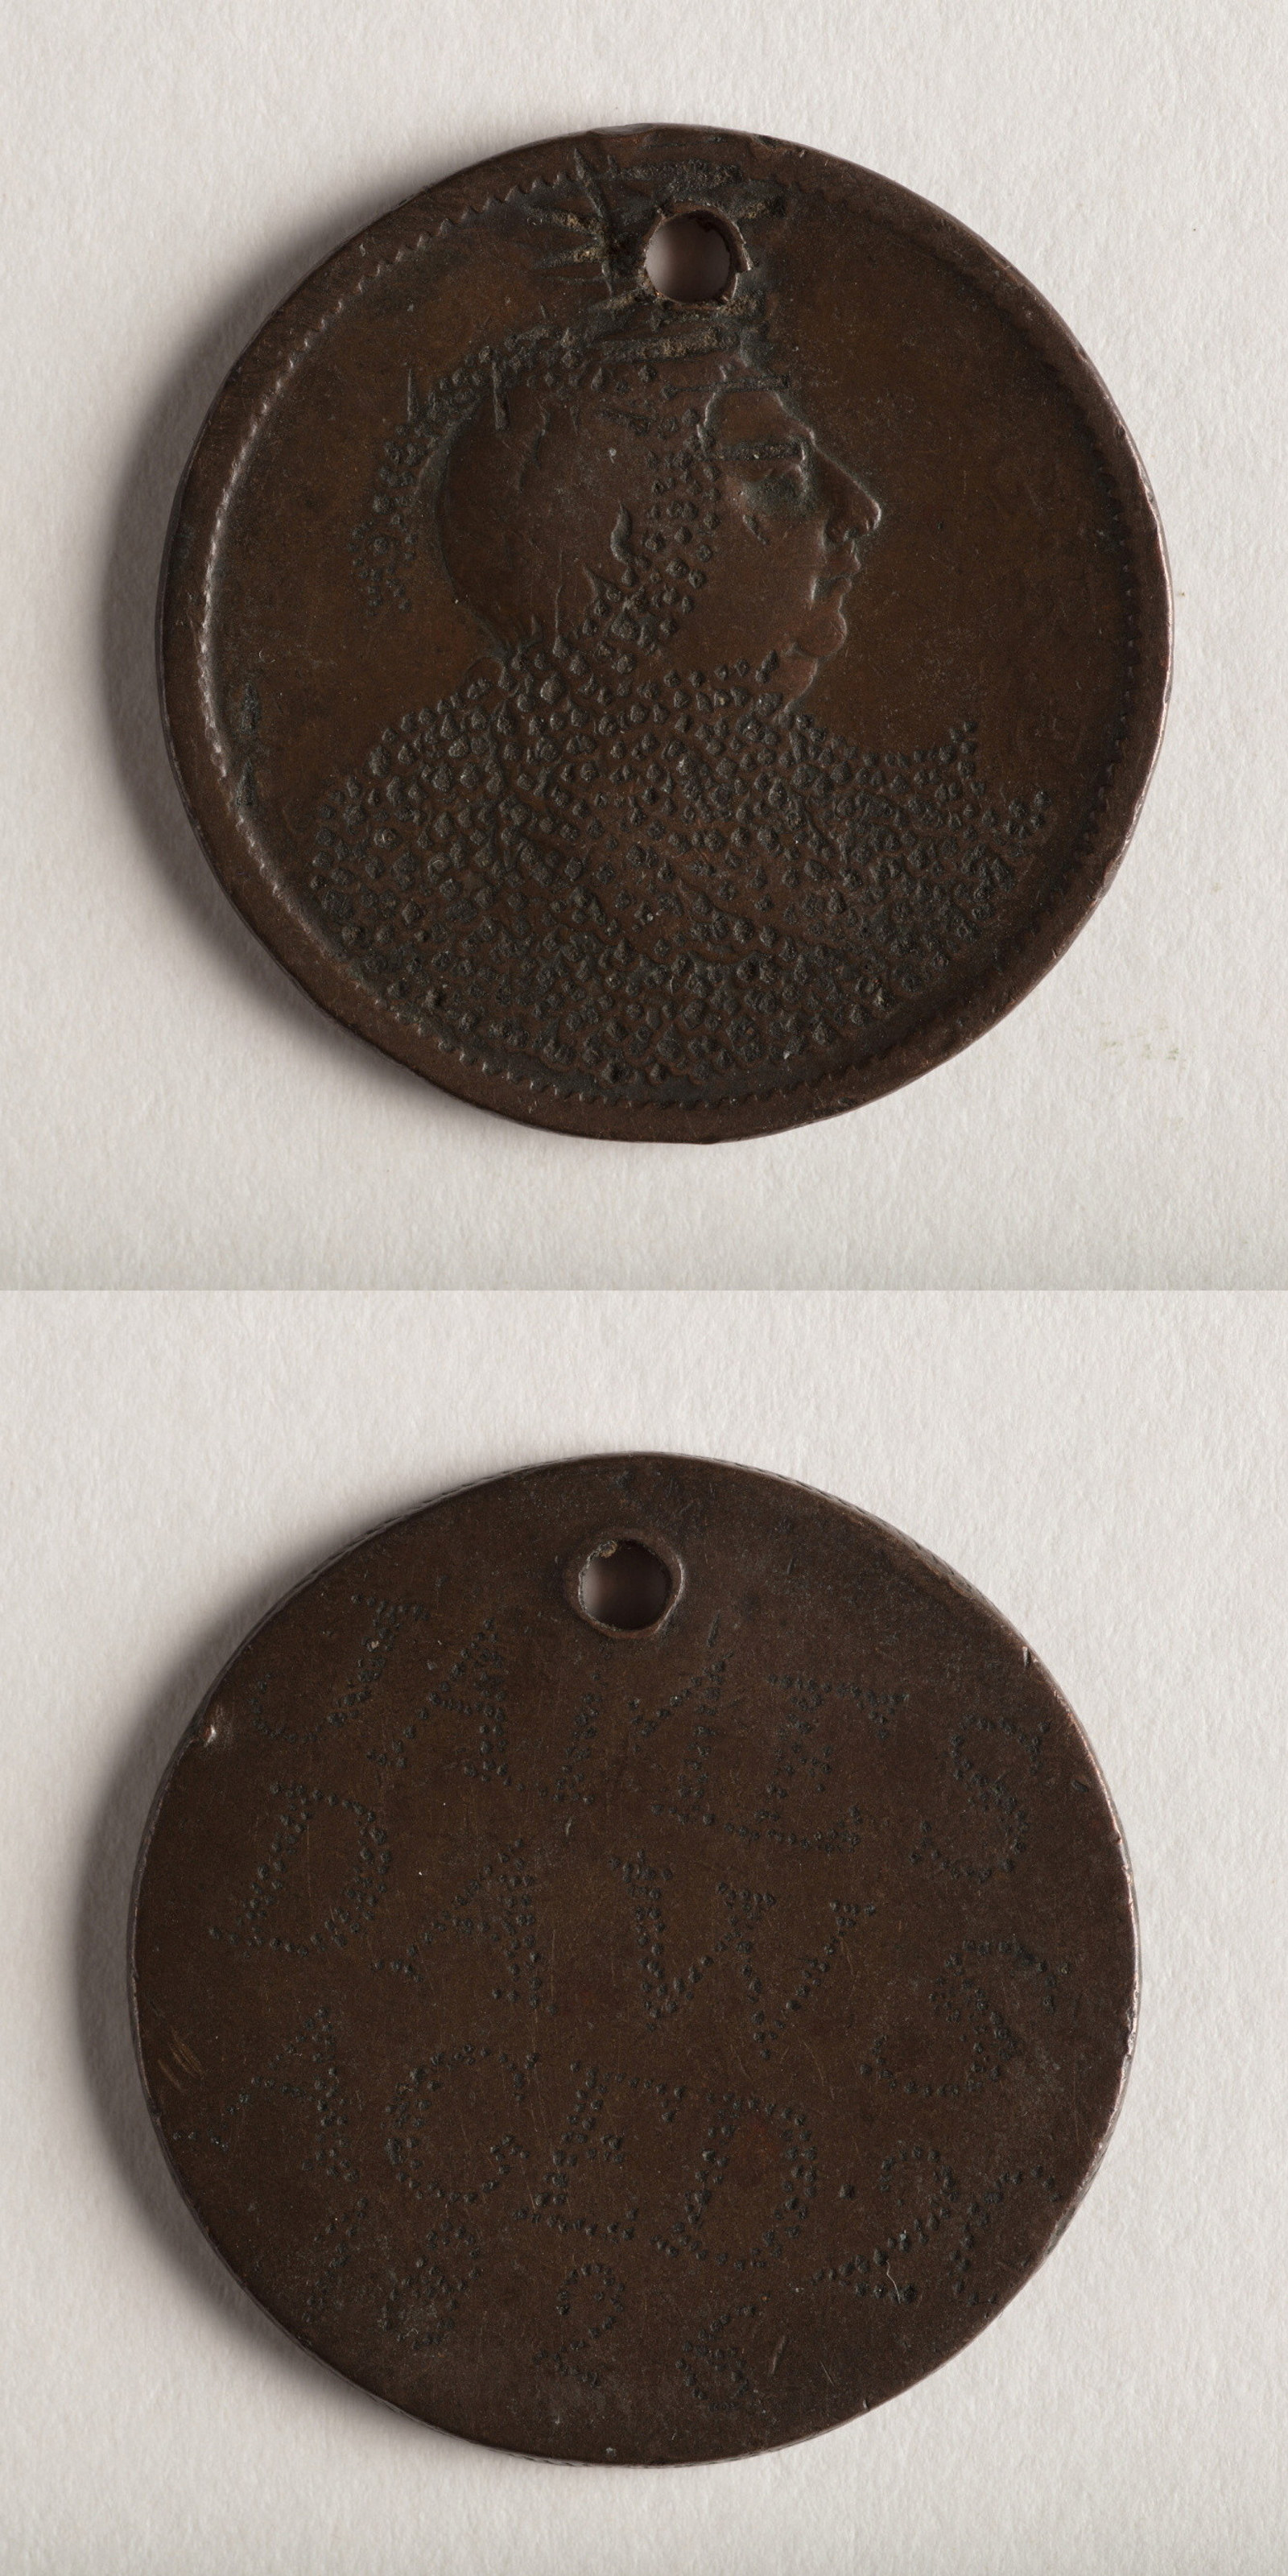 Stacked images of convict love token, front and back.